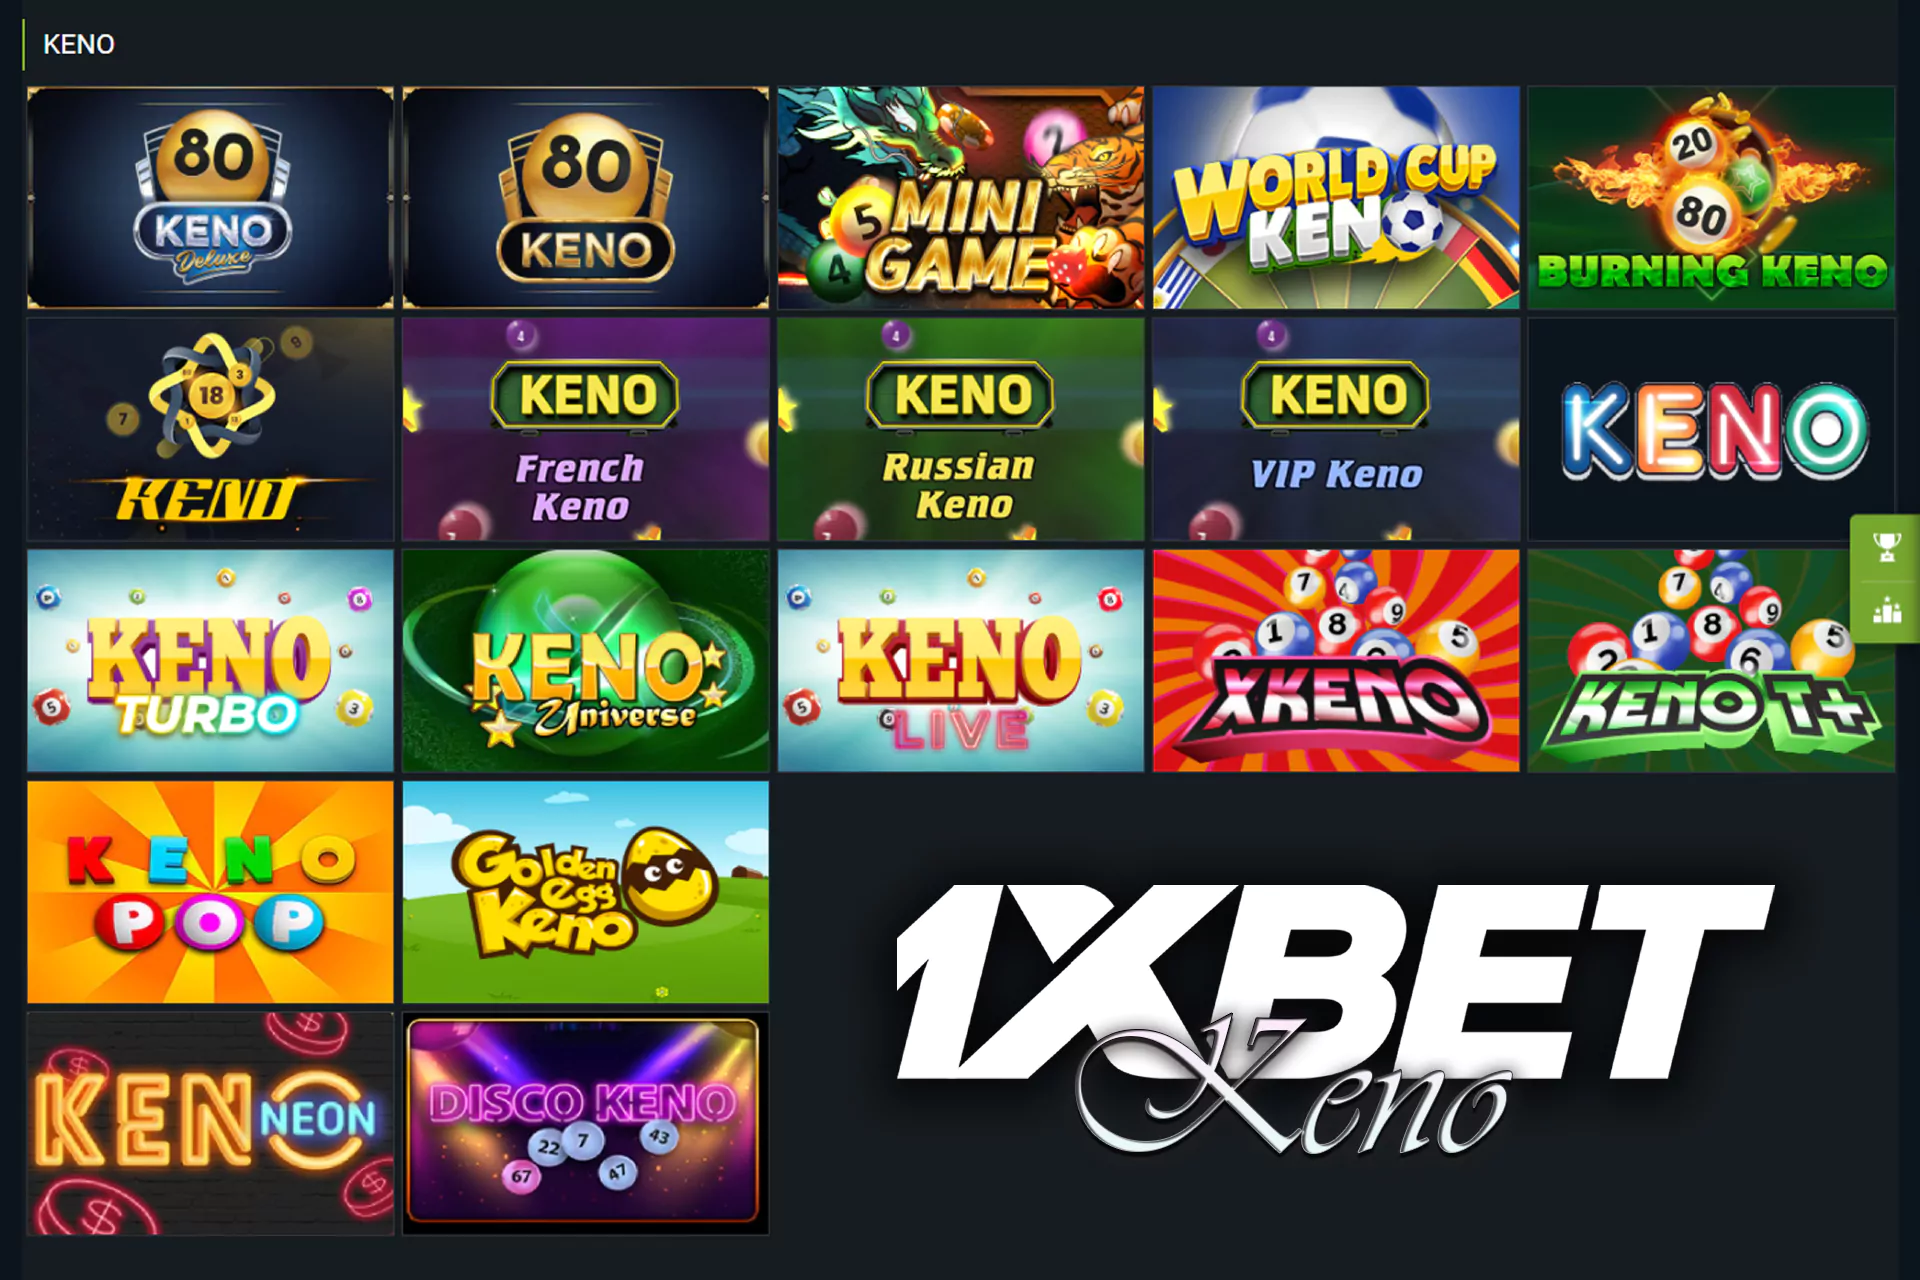 Keno is another online casino game, at which you have to bet on 20 numbers out of the 80 available on its ticket.